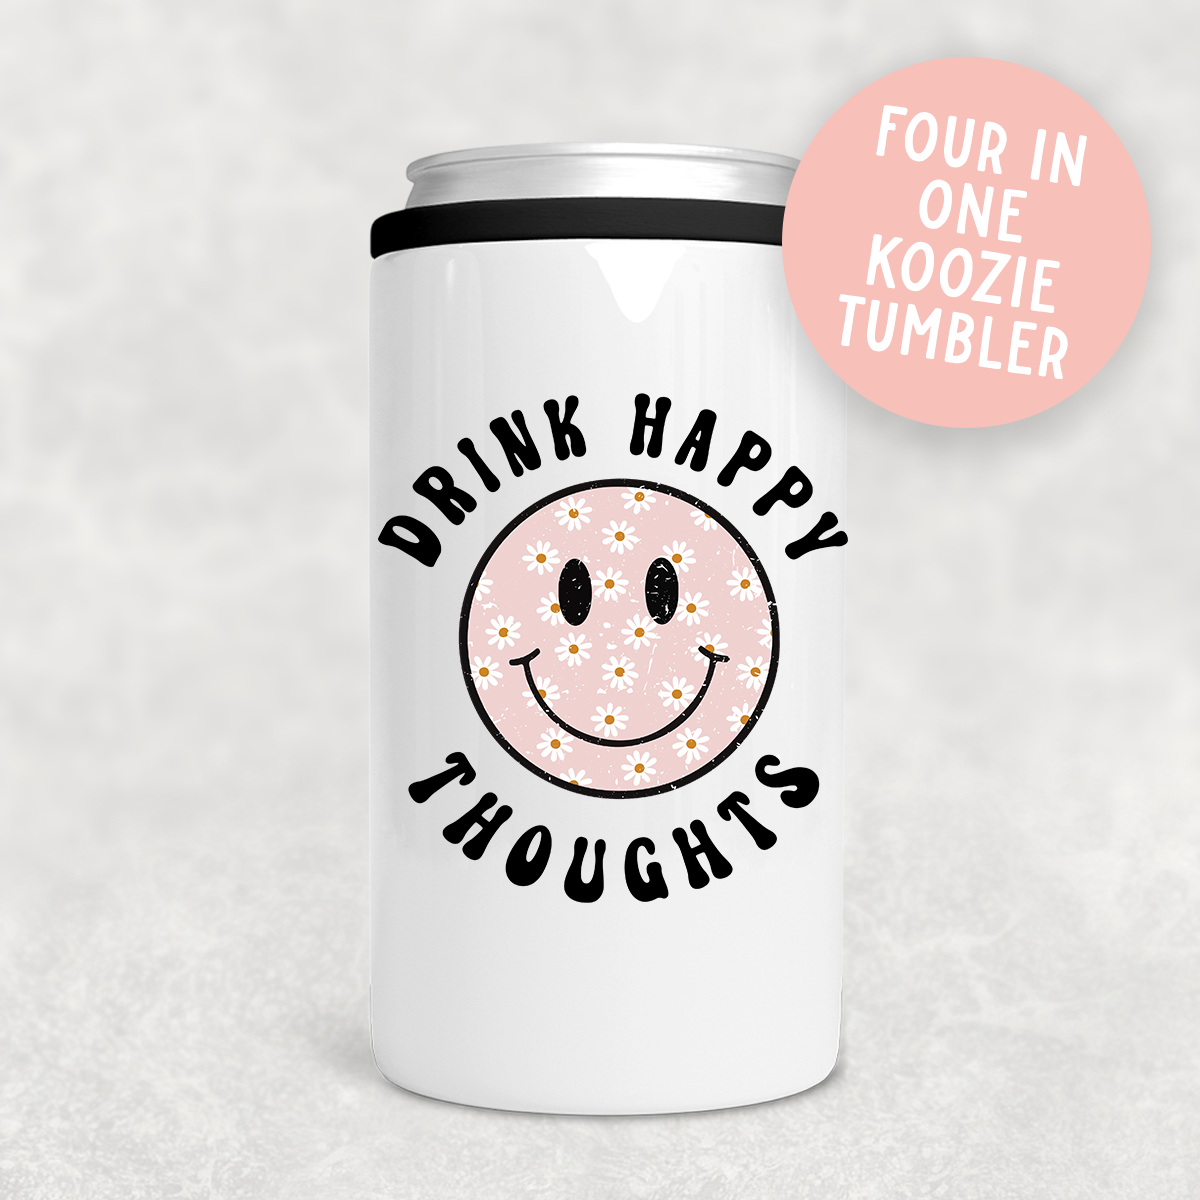 Drink Happy Thoughts Pink 4 in 1 Tumbler